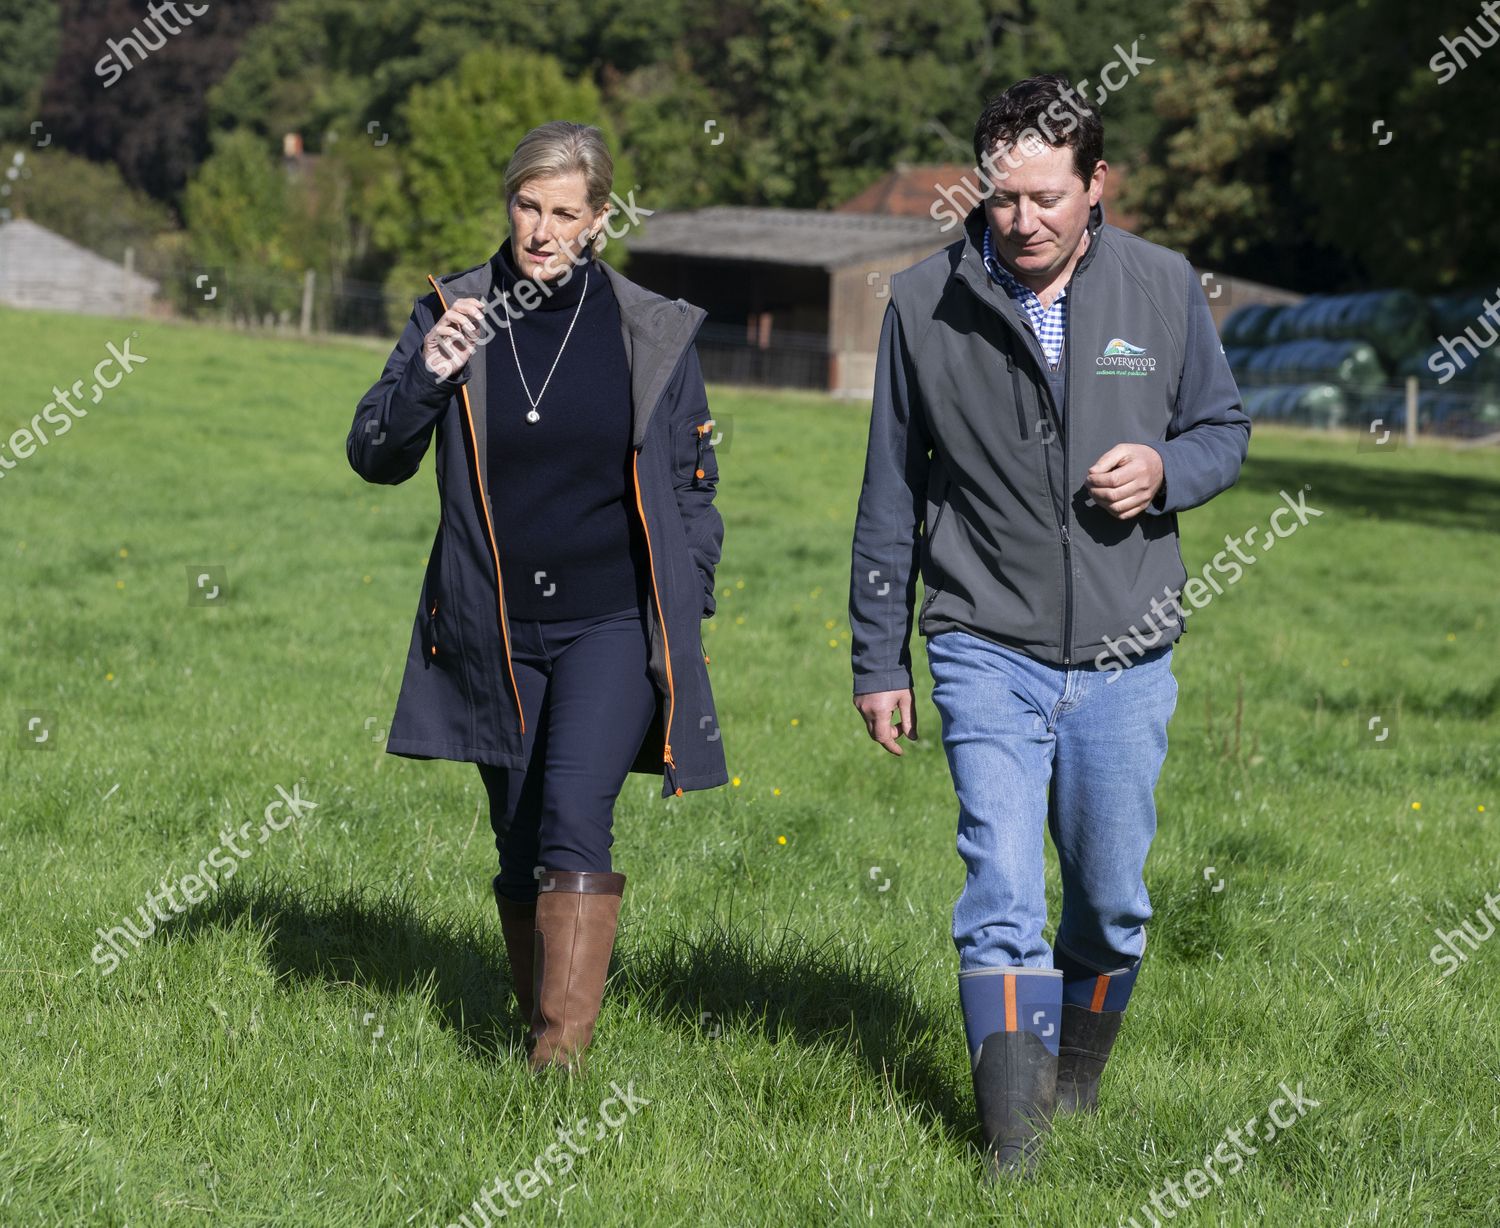 sophie-countess-of-wessex-visit-to-coverwood-farm-surrey-uk-shutterstock-editorial-10787745ah.jpg